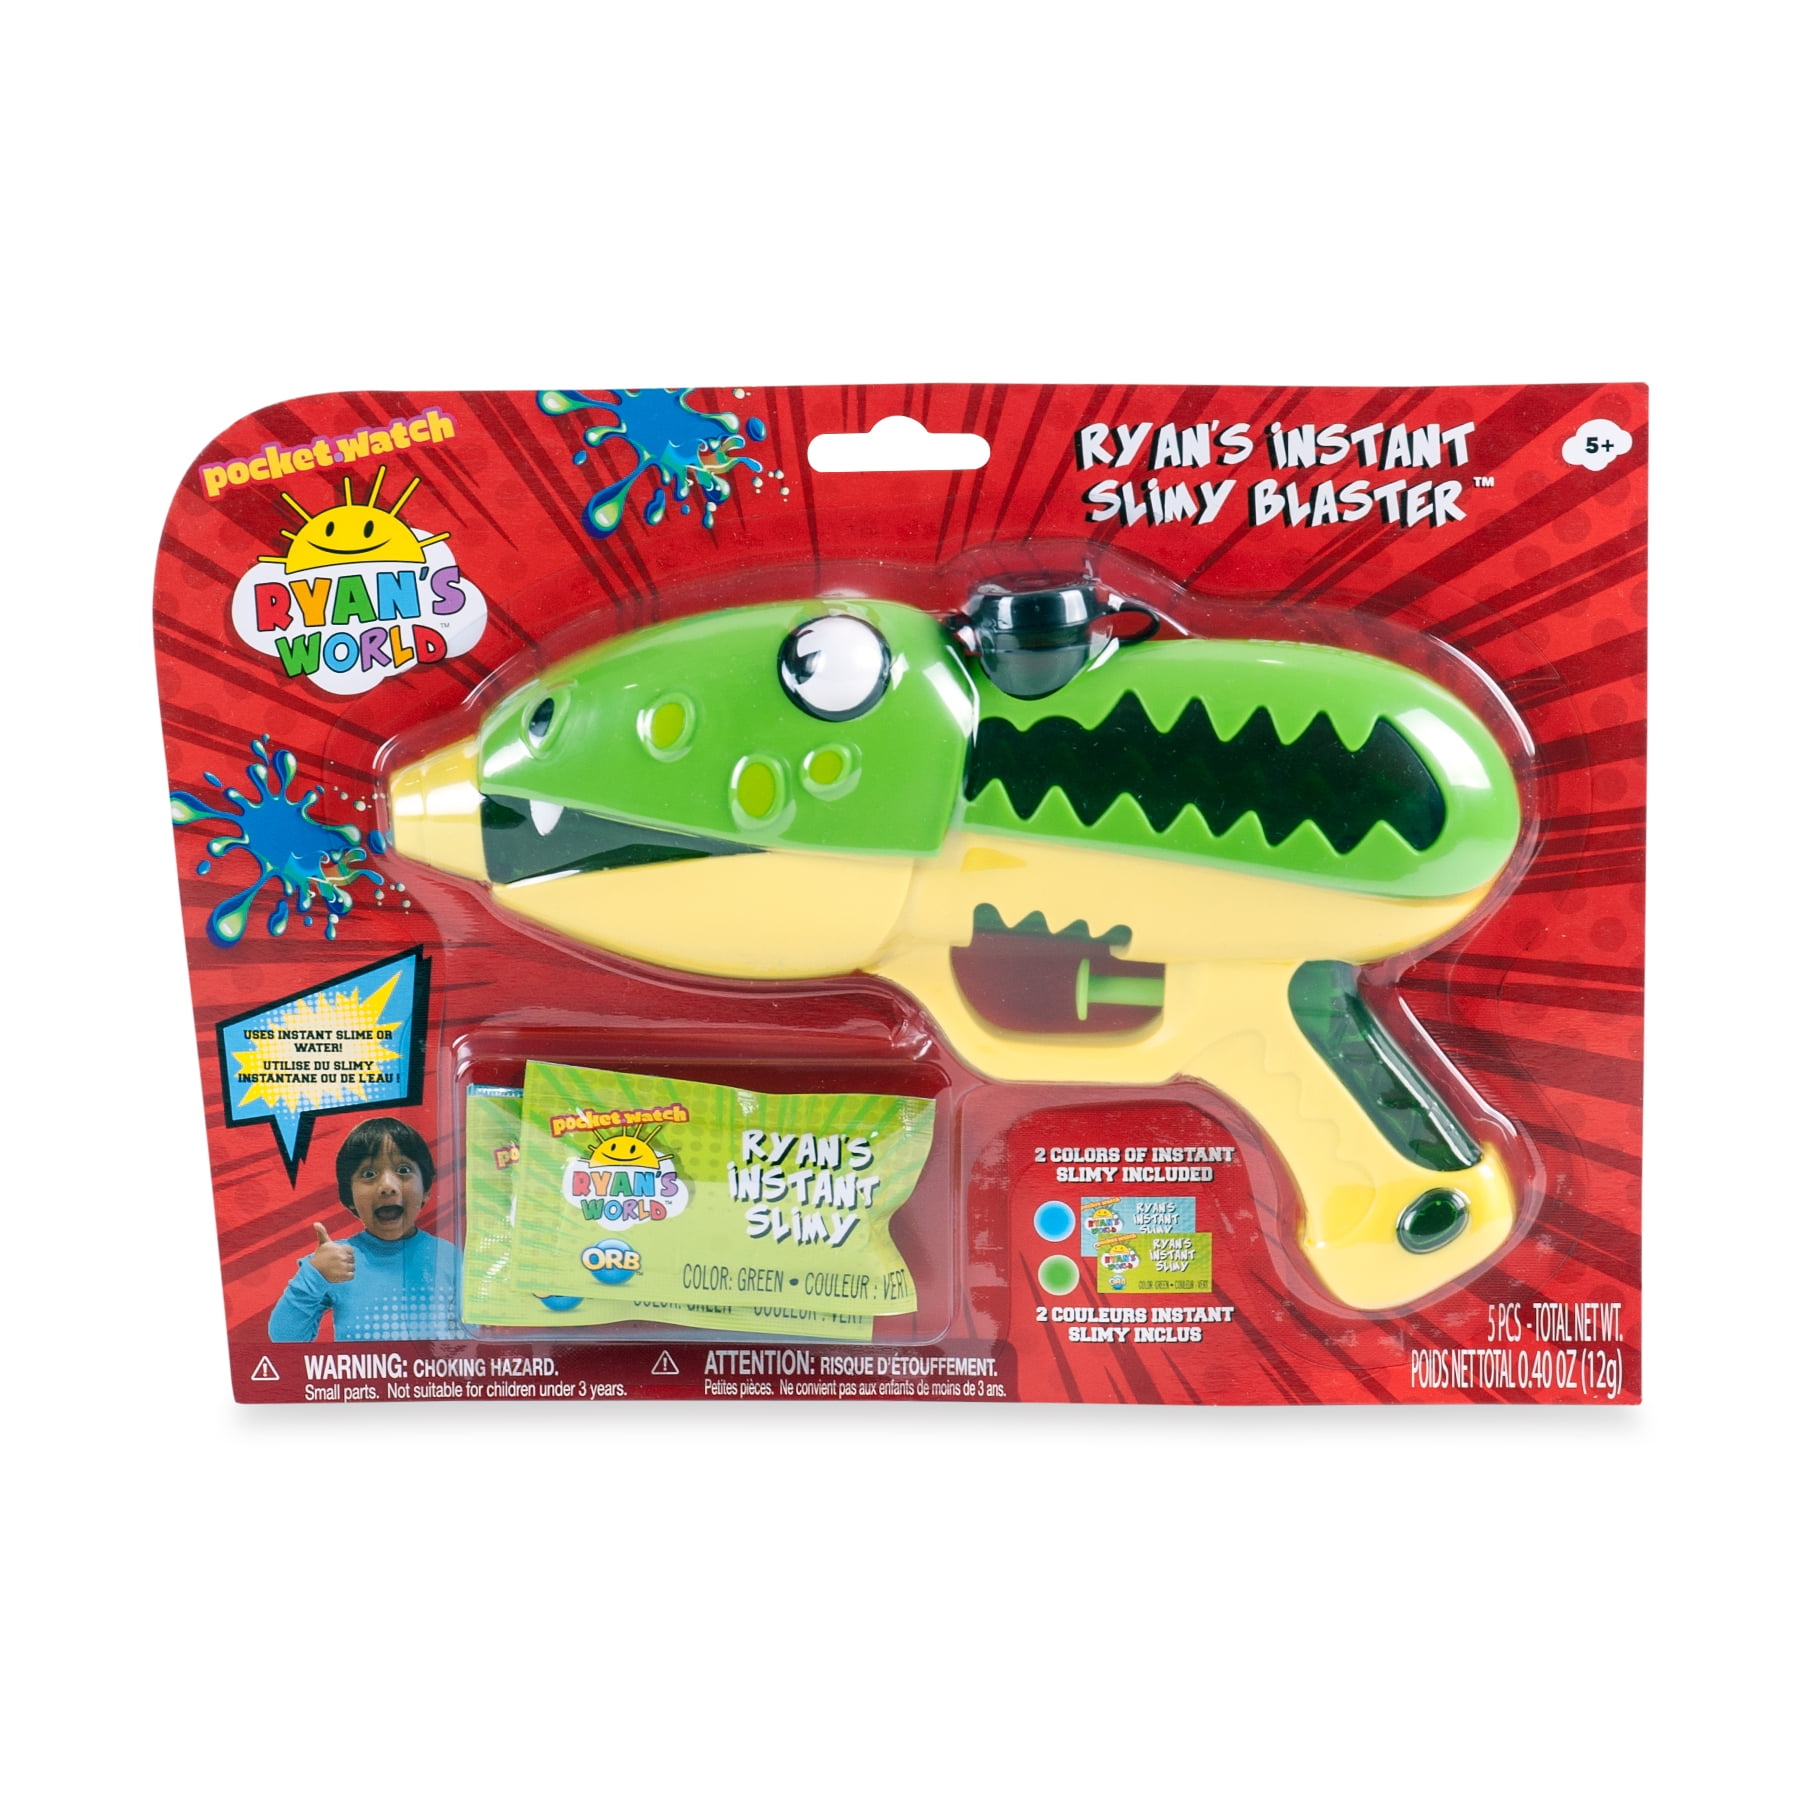 gus the gator toy